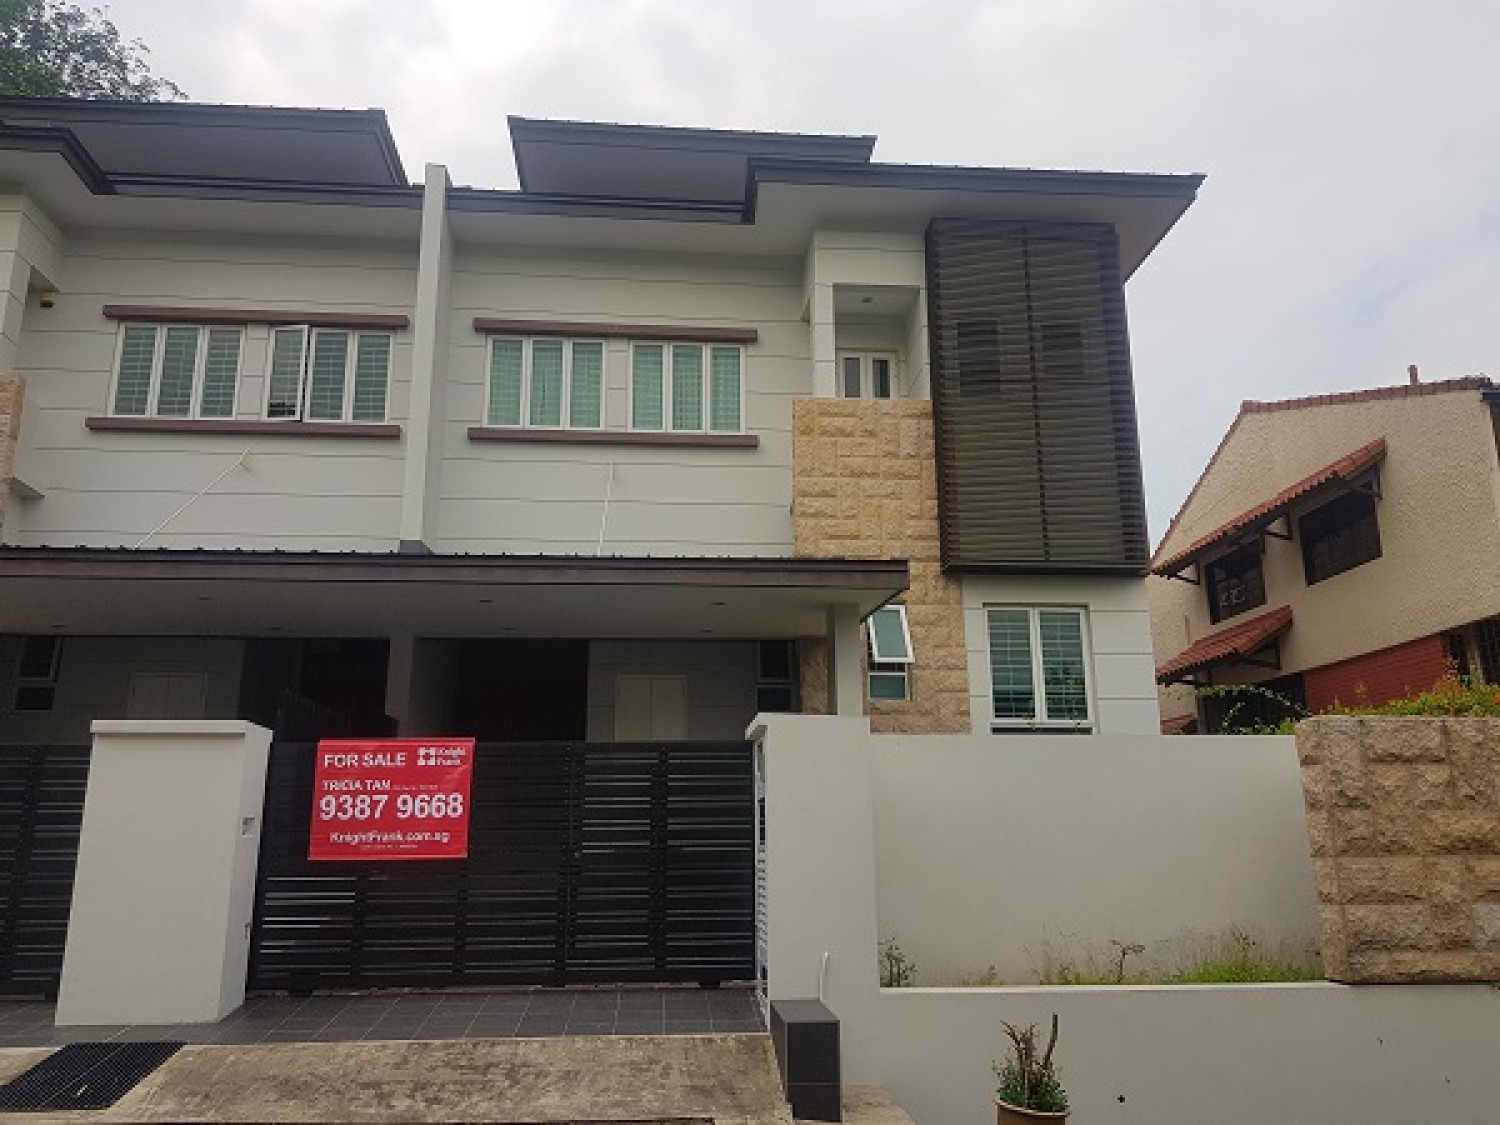 Freehold semi-detached house at Clementi Crescent on the block for $7 mil - Property News